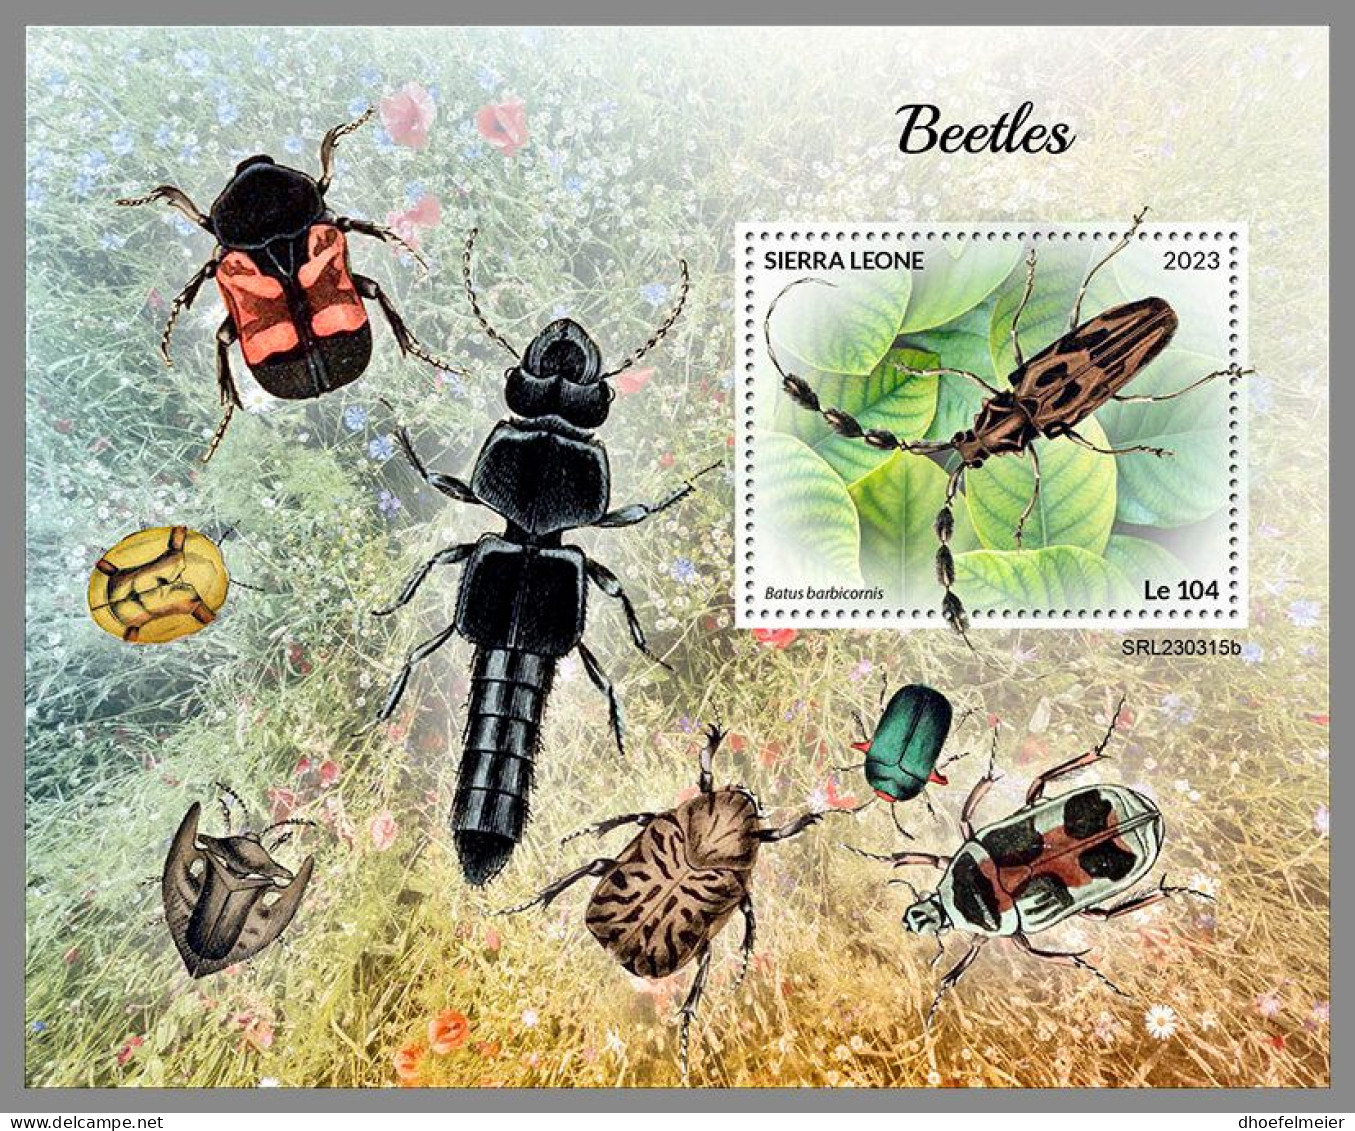 SIERRA LEONE 2023 MNH Beetles Käfer S/S – OFFICIAL ISSUE – DHQ2418 - Beetles